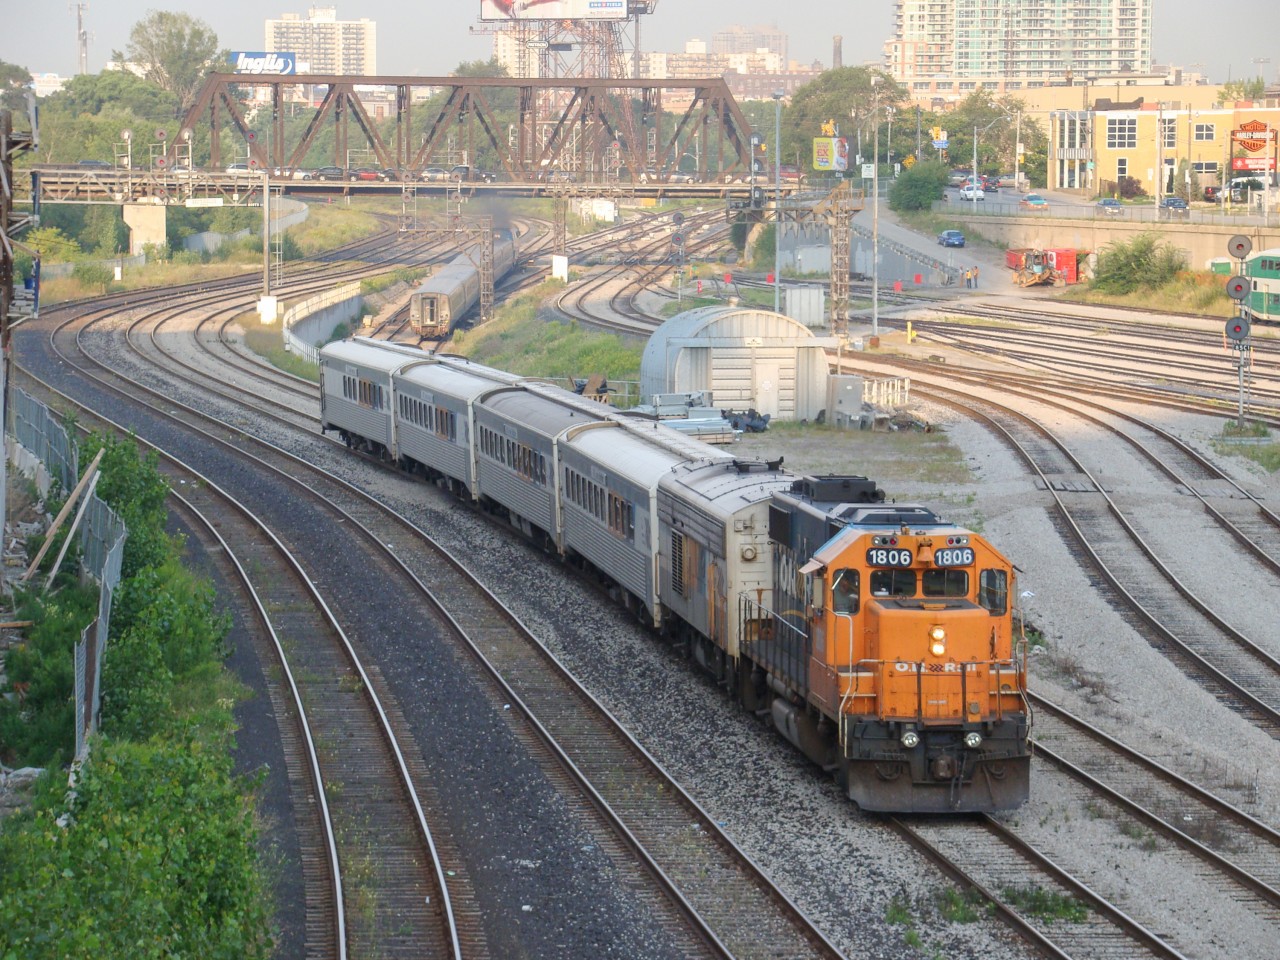 The Northlander heads towards Toronto Union Station to entrain passengers heading towards Cochrane and points in between.